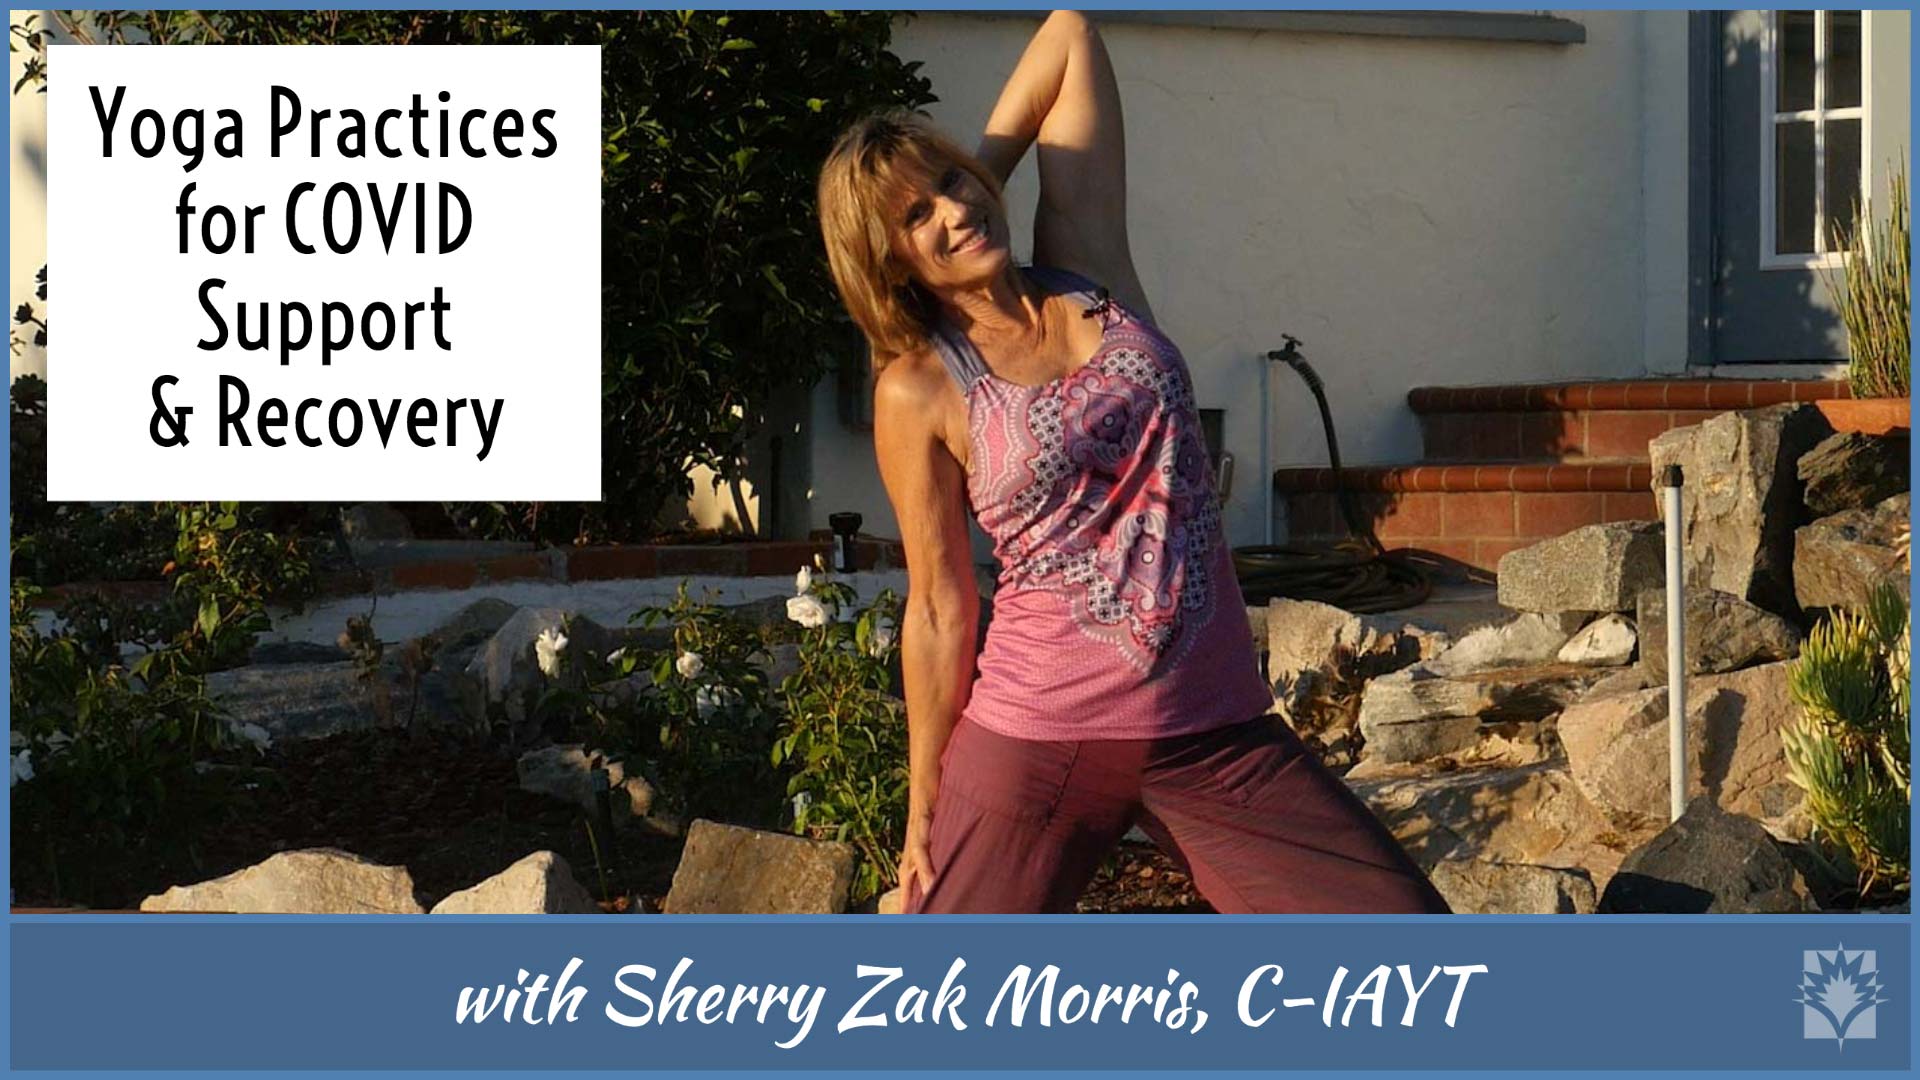 Sherry Zak Morris Yoga for Covid Support & Recovery